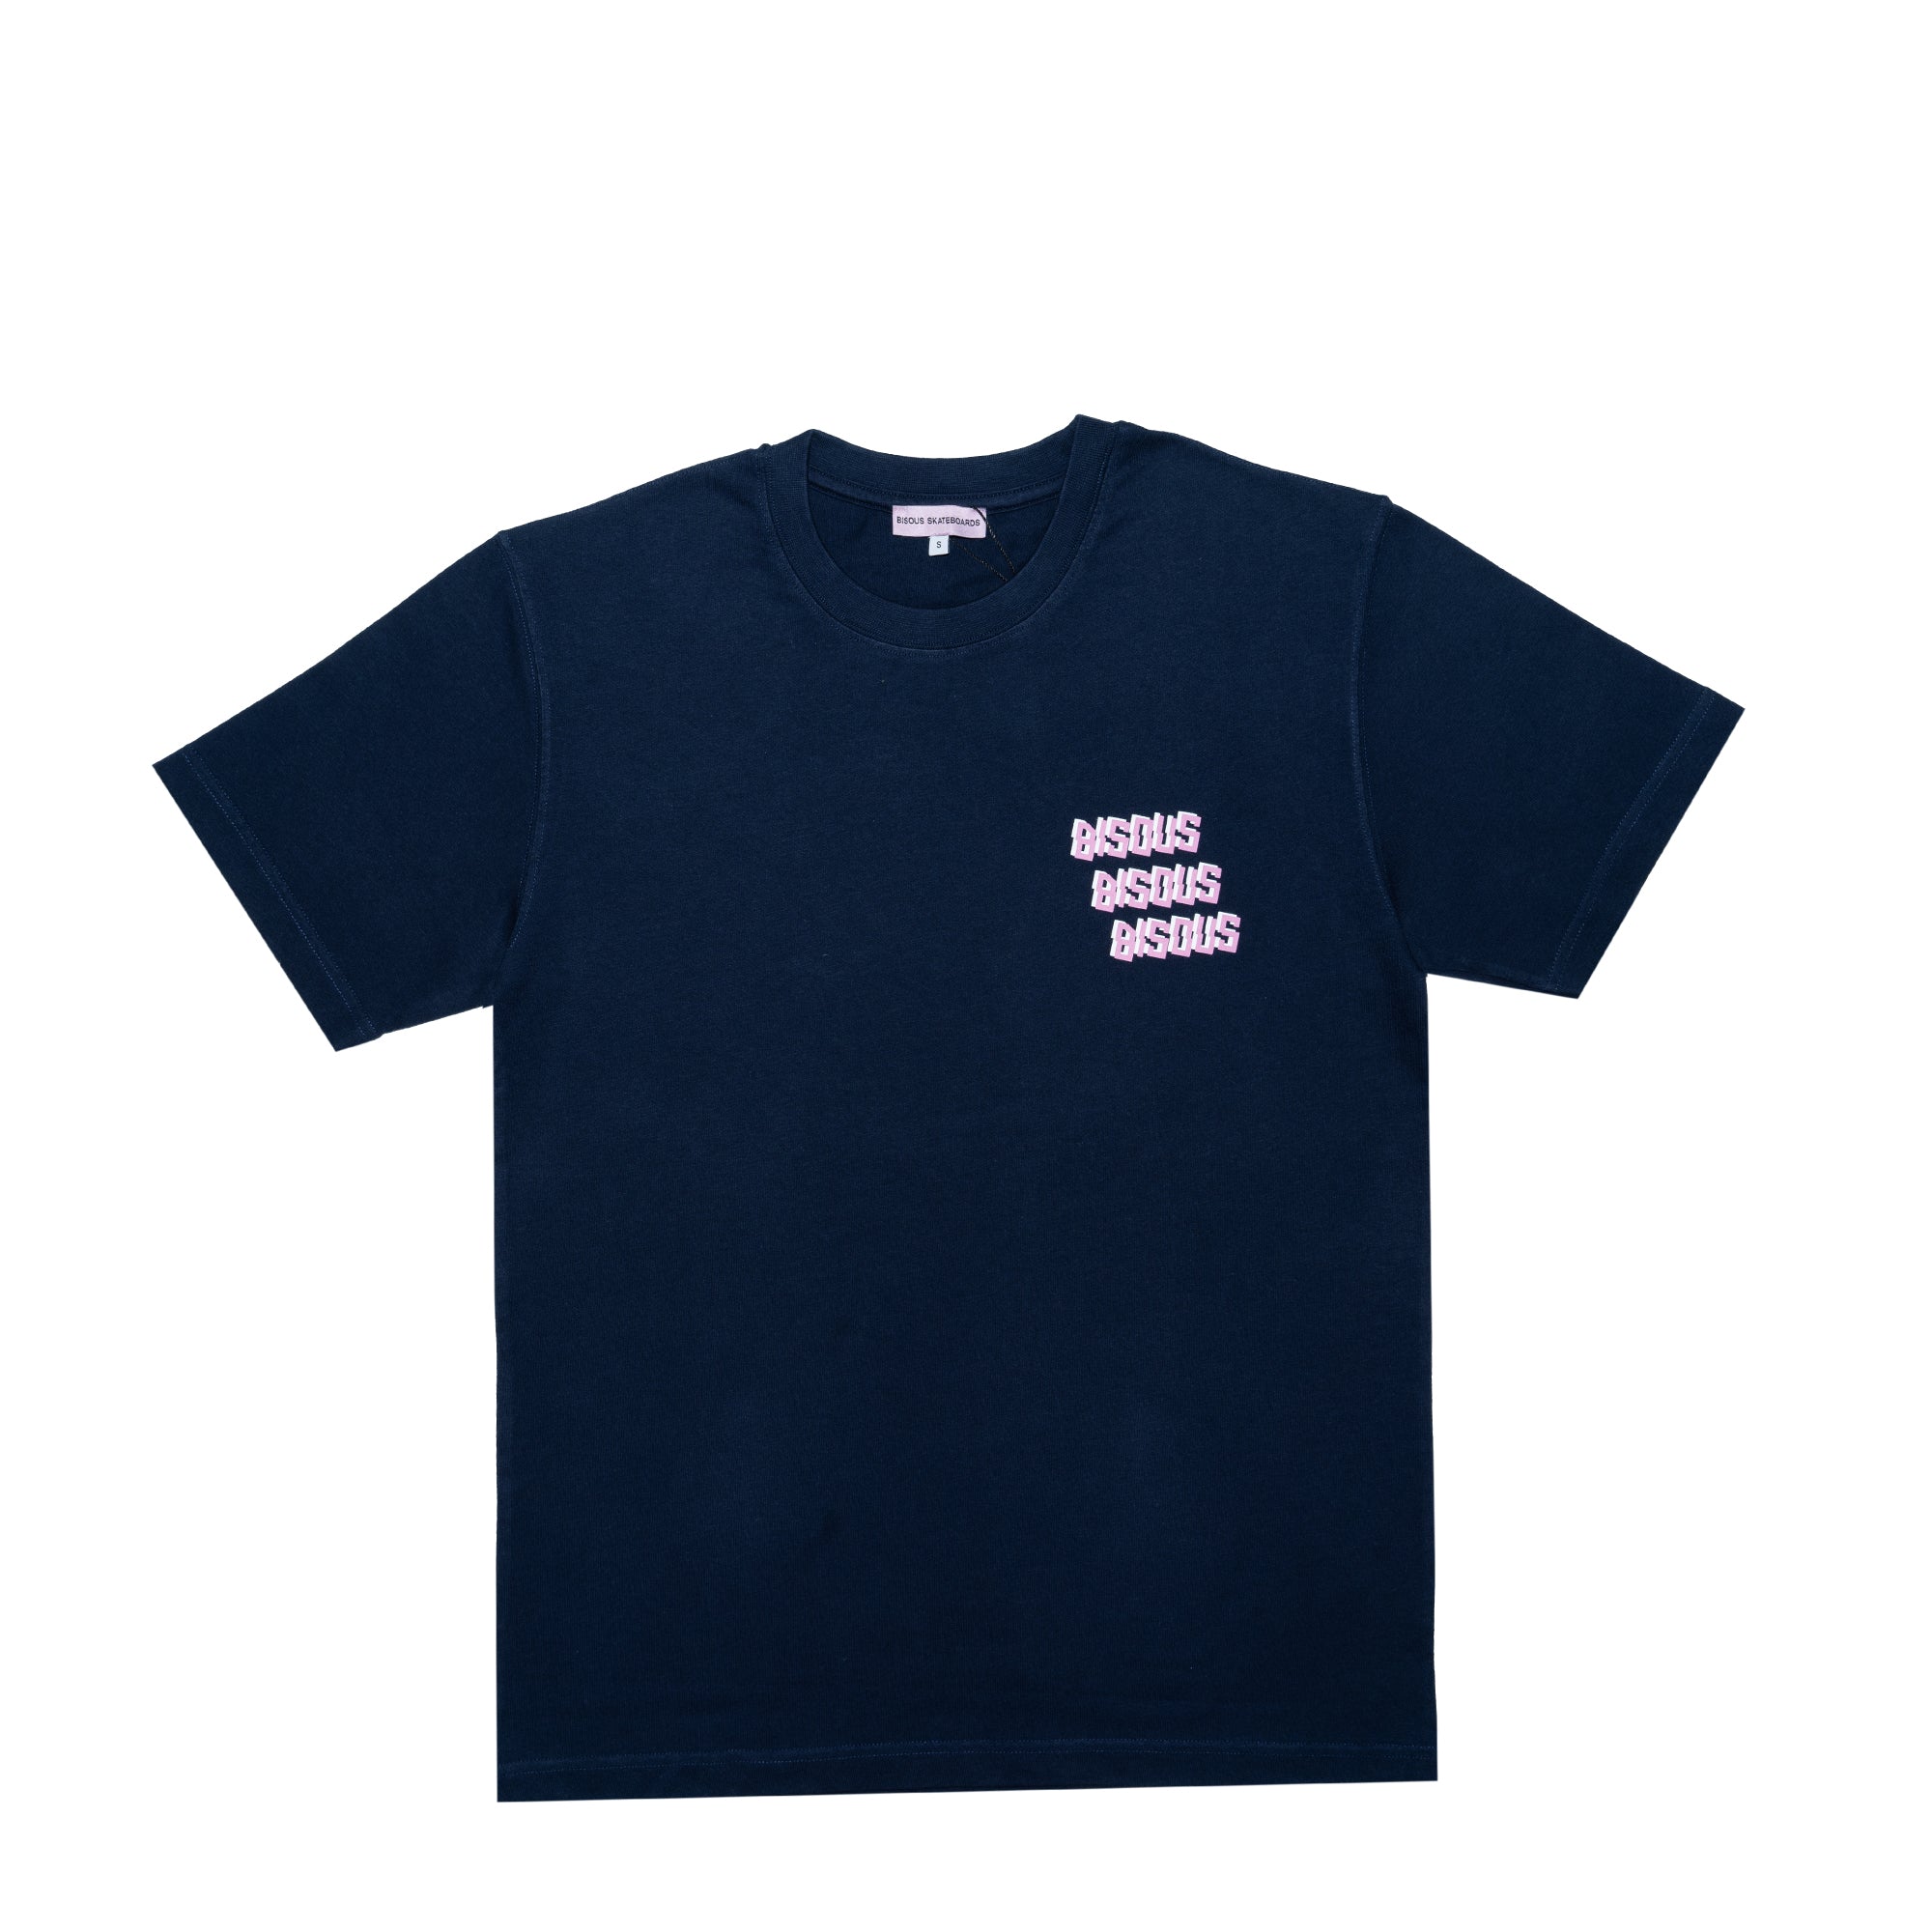 T-shirts Bisous x3 Back Navy